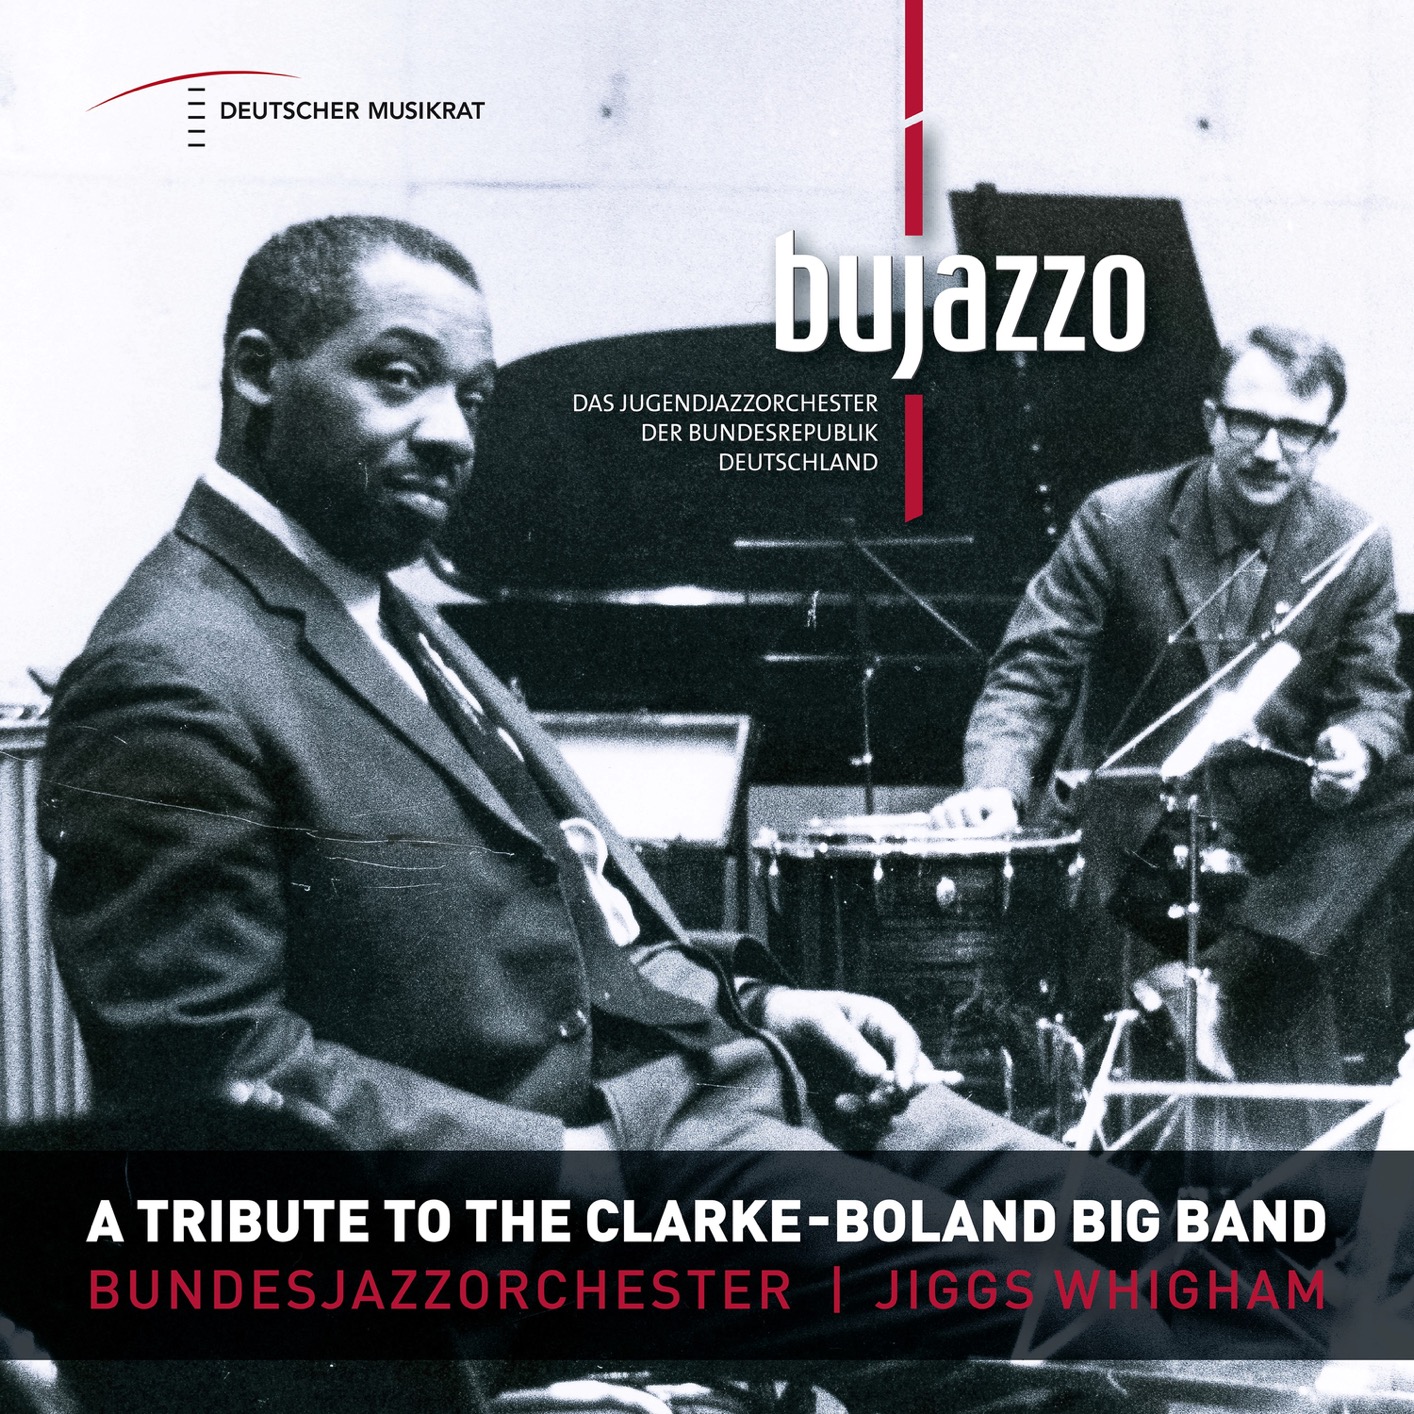 BuJazzO, Jiggs Whigham – A Tribute to the Clarke – Boland Big Band (2021) [Official Digital Download 24bit/96kHz]